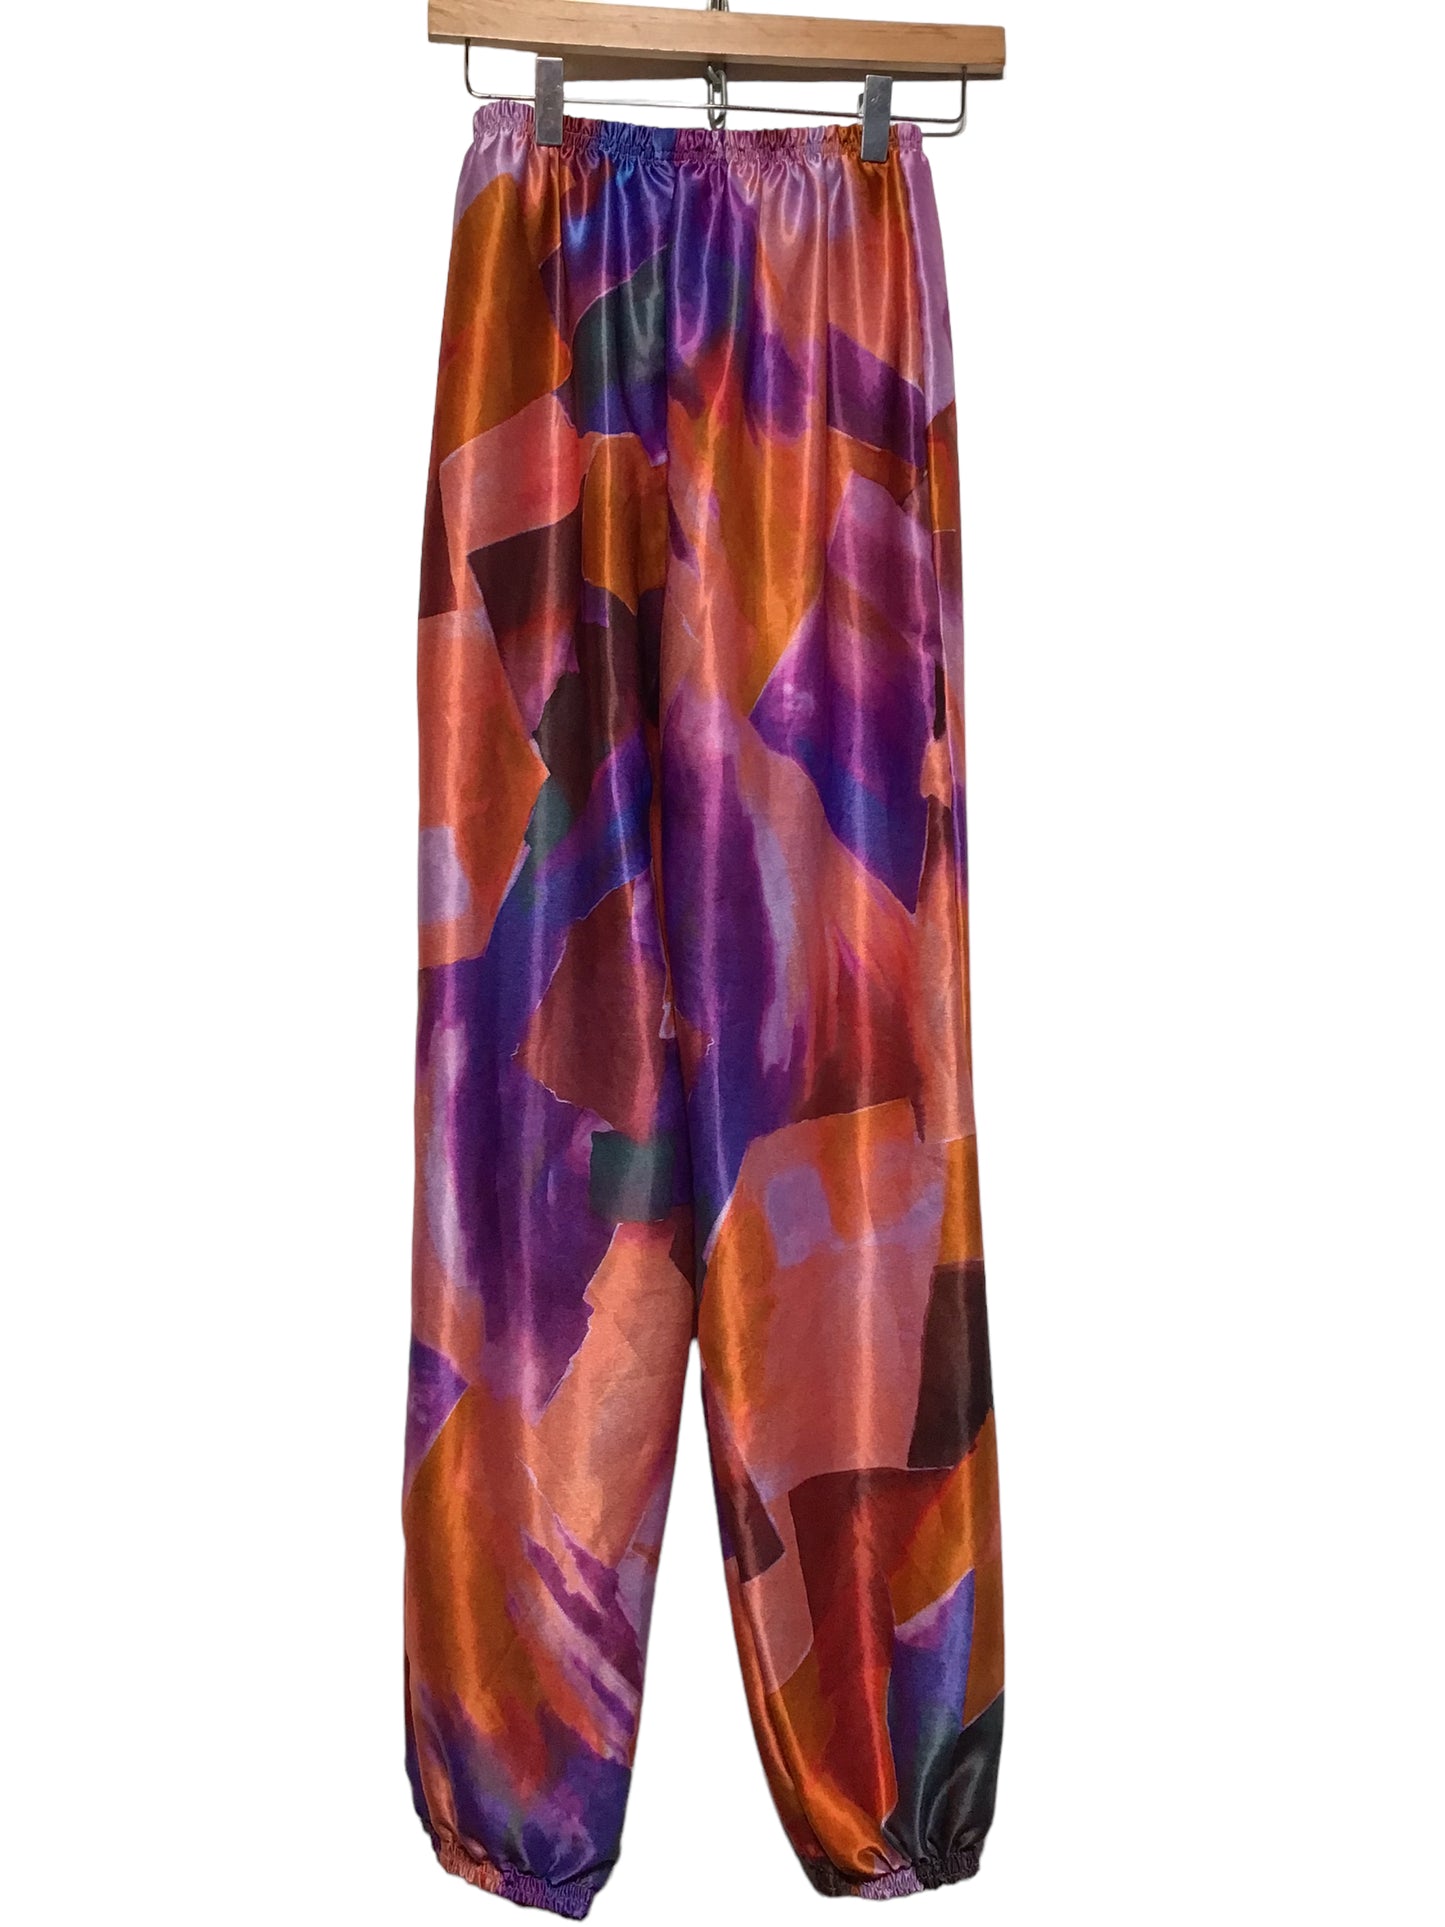 Abstract Print Shiny Lightweight Trousers (Size M)